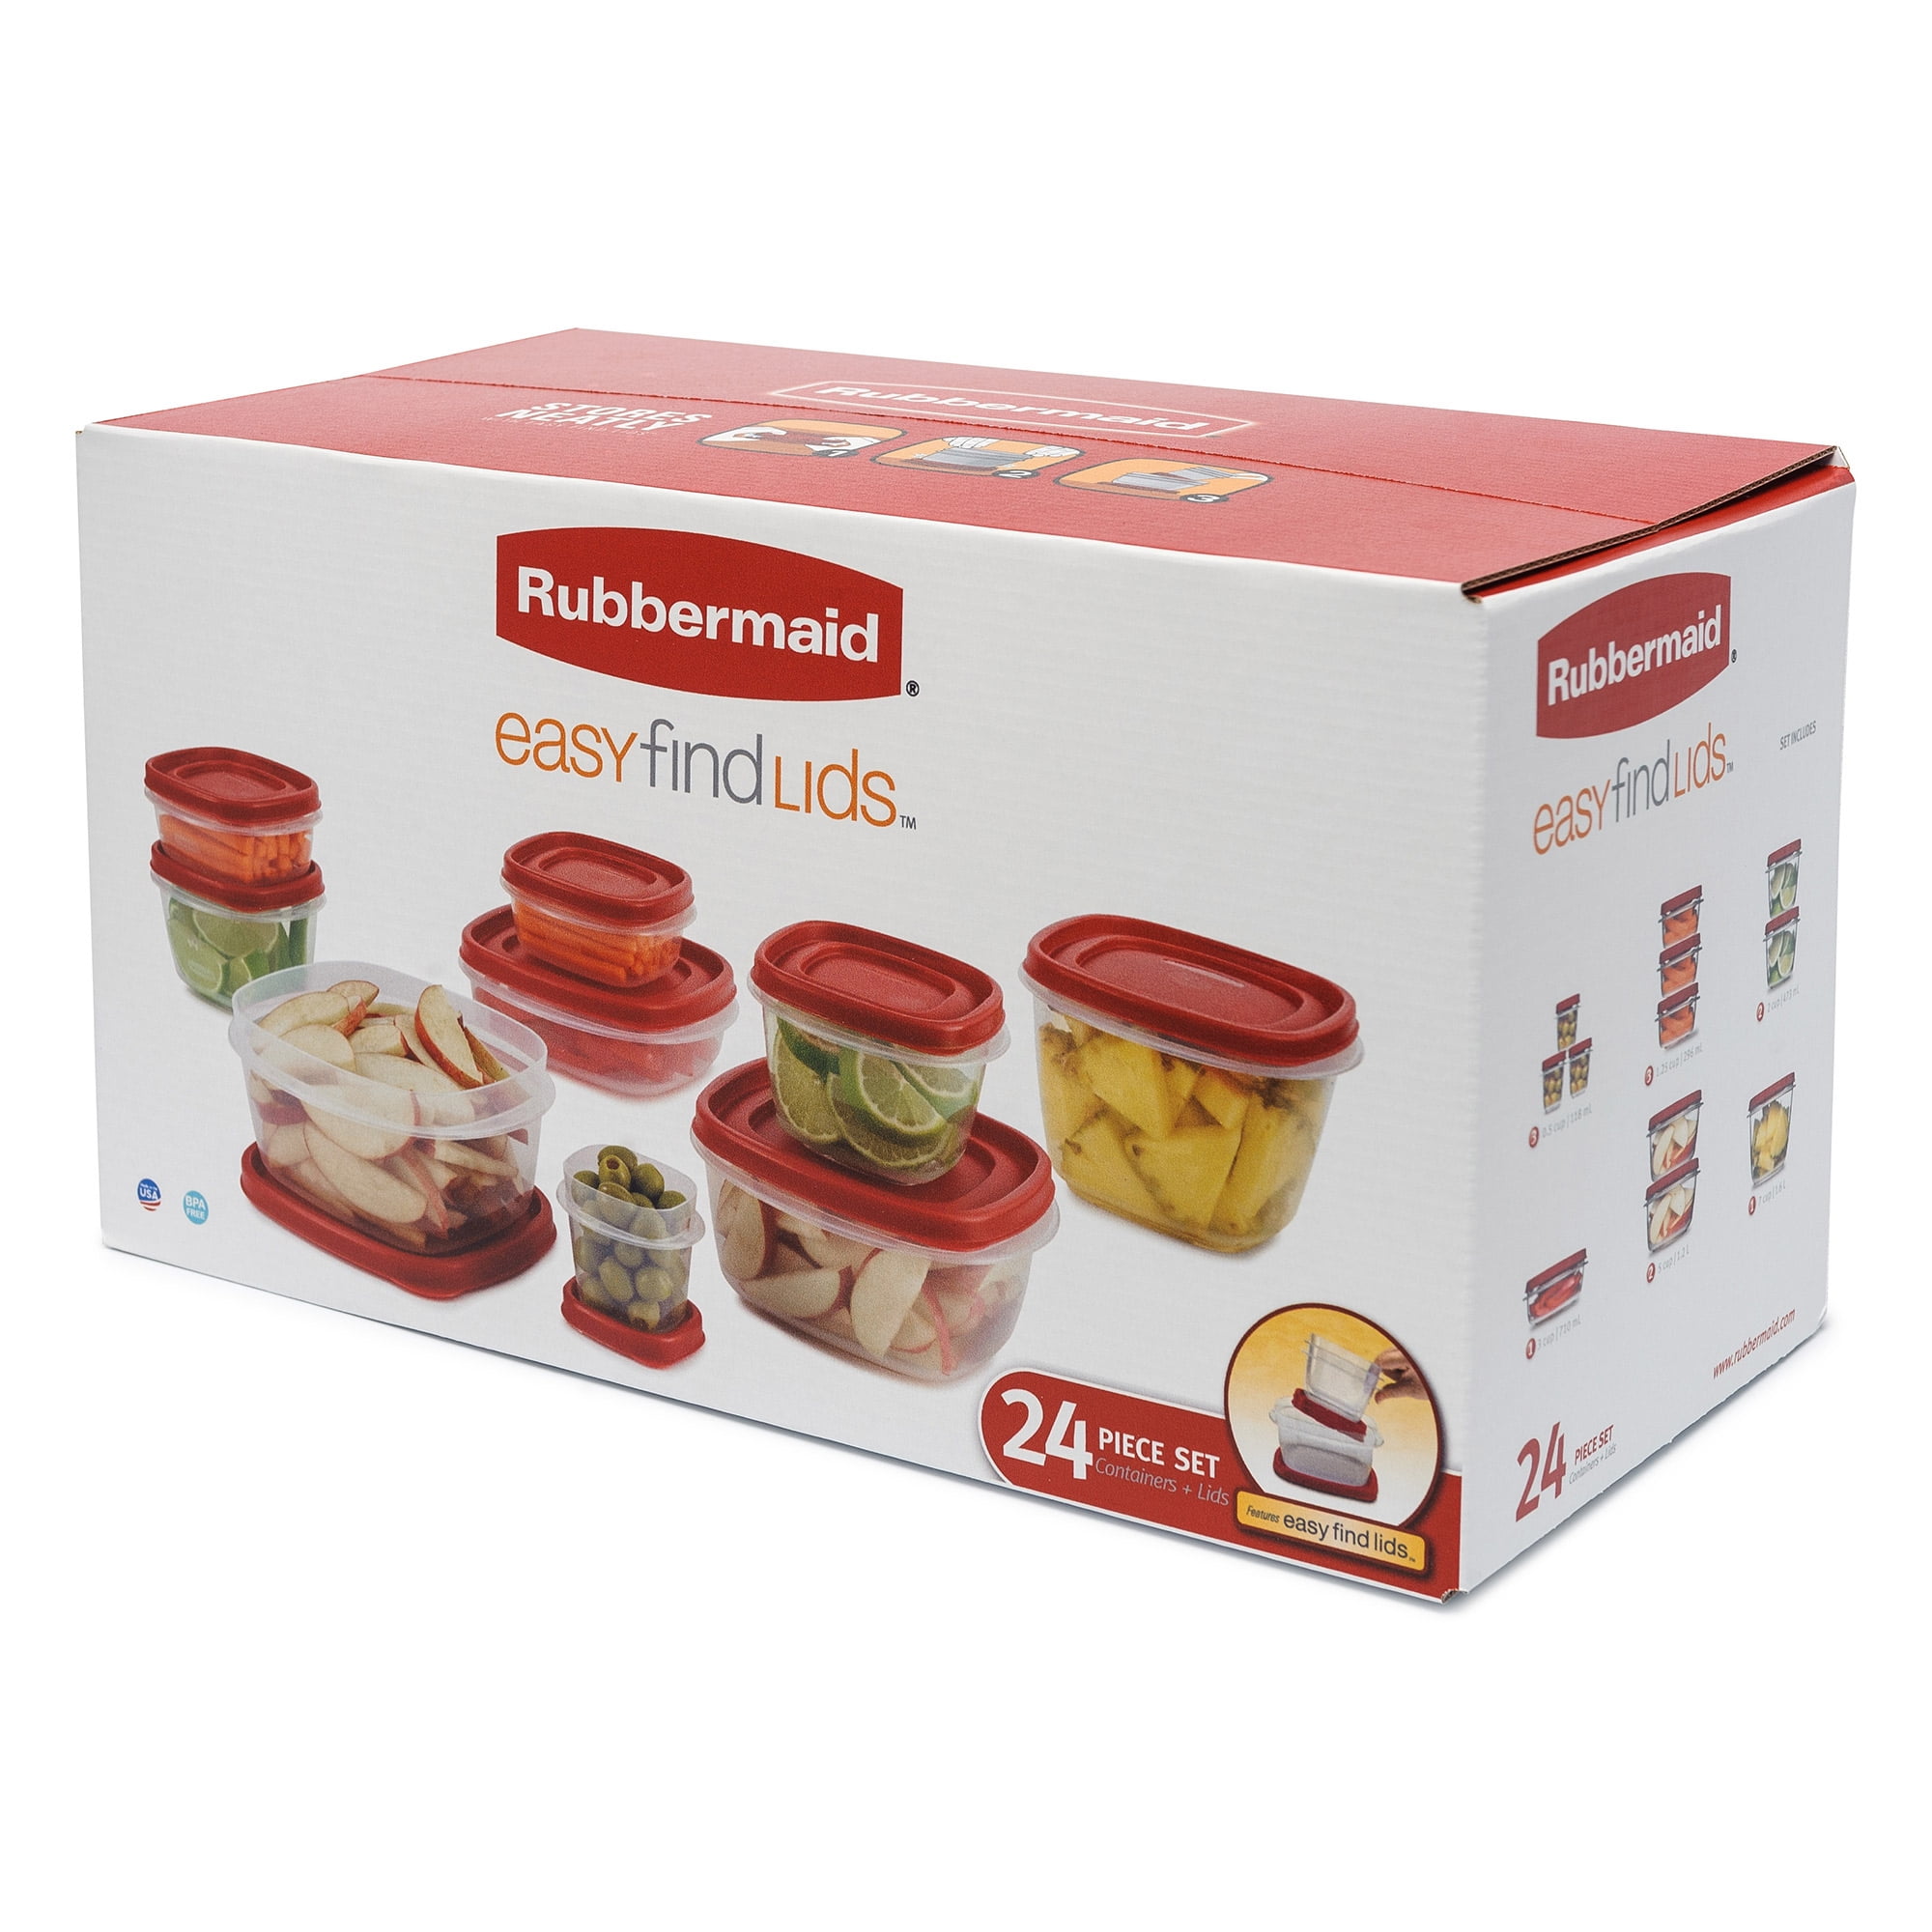 Details about   NEW in Box Rubbermaid Easy Find Lids Food Storage Containers 28-Piece Set Red